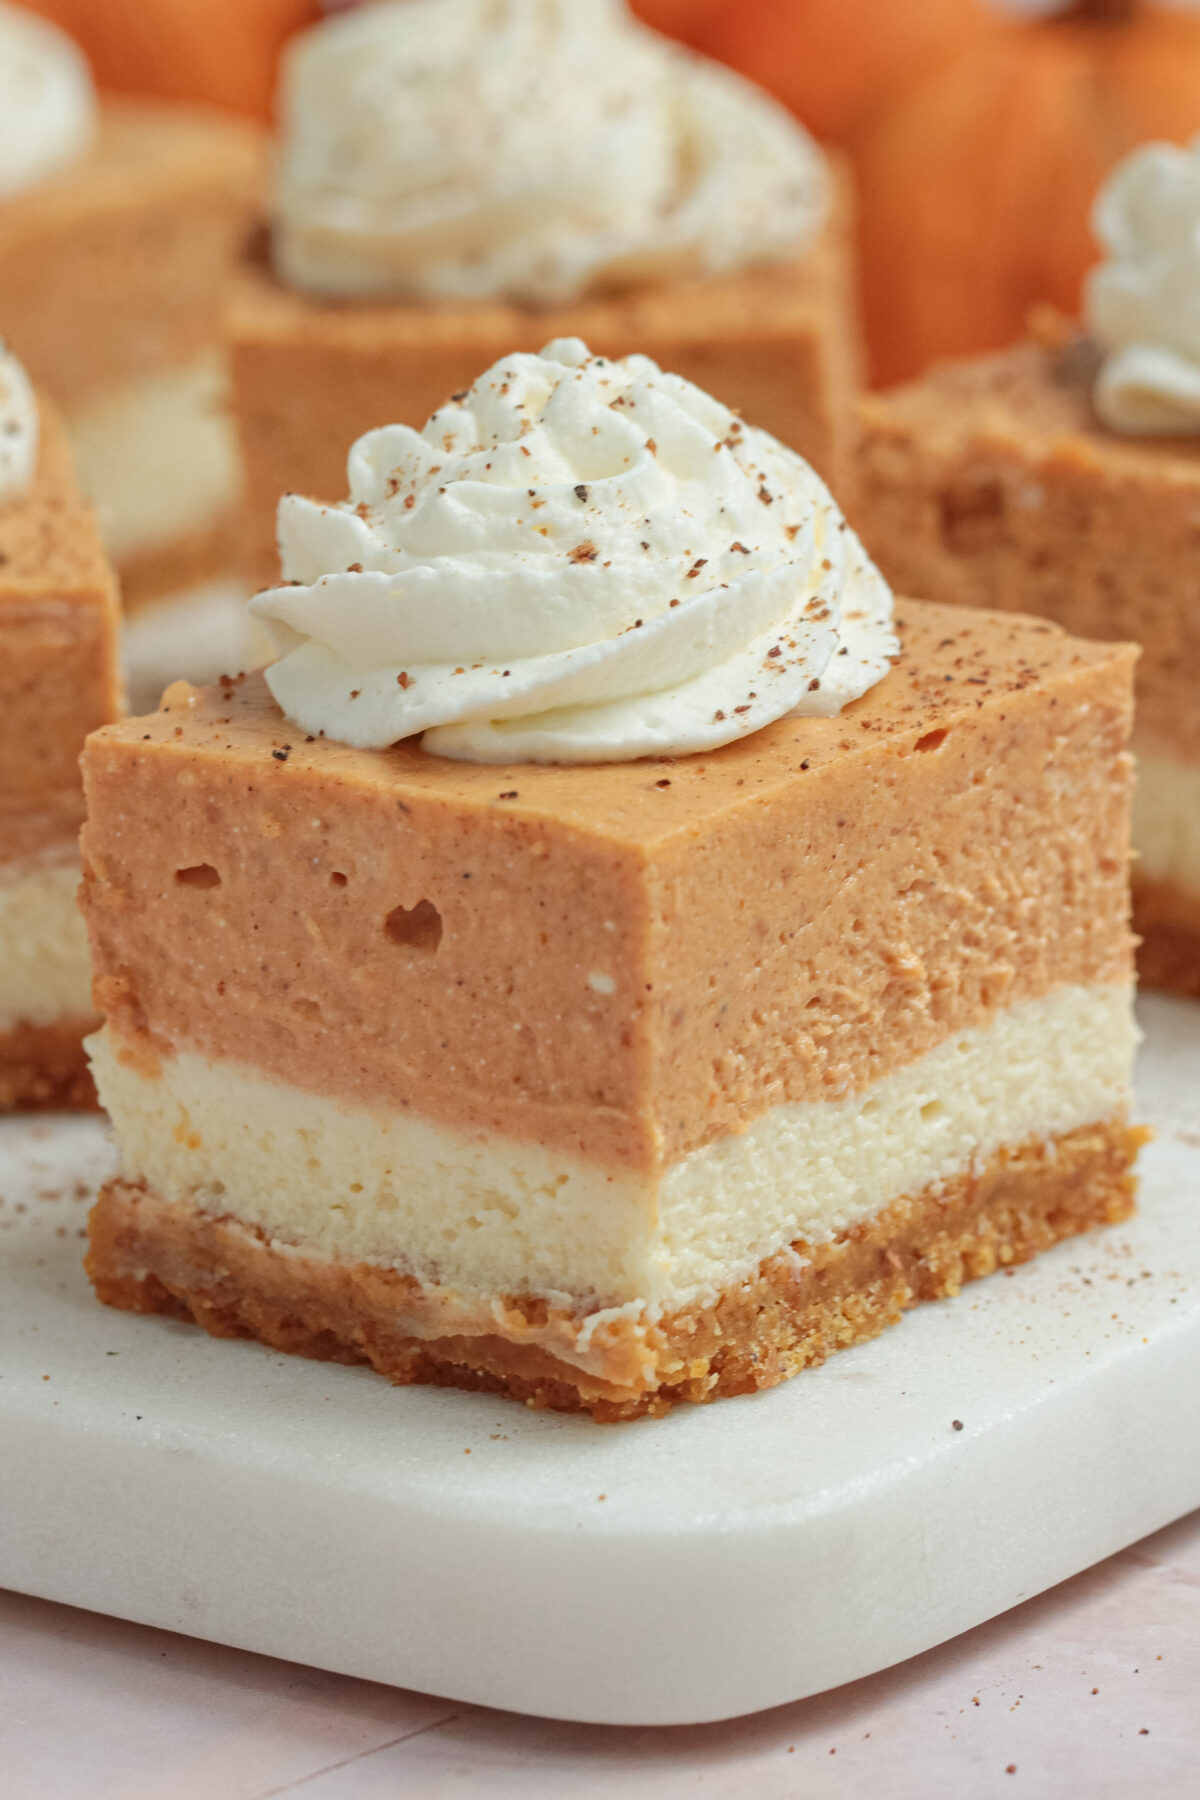 Make this delicious Fall treat with our easy recipe! Lightly spiced and perfectly creamy, these pumpkin cheesecake bars are sure to be a hit.